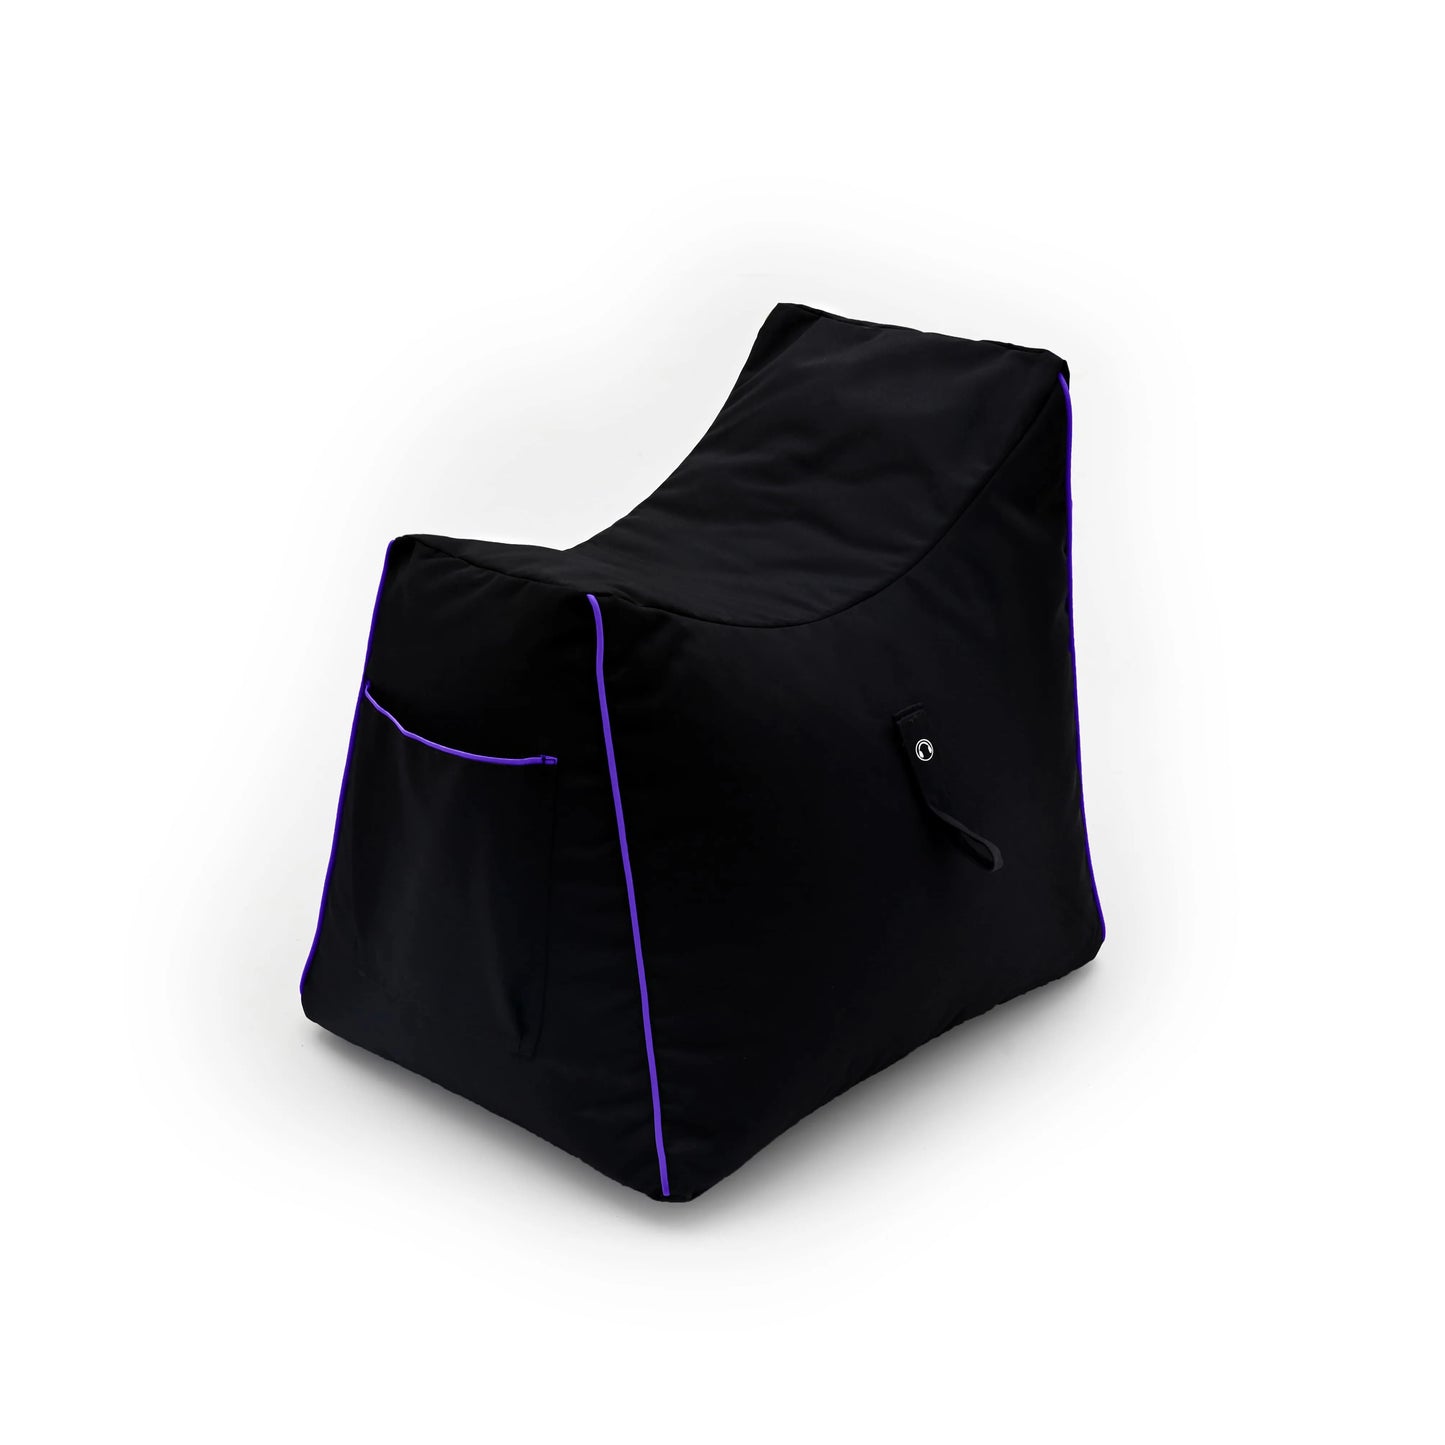 A comfortable black bean bag chair with purple piping.